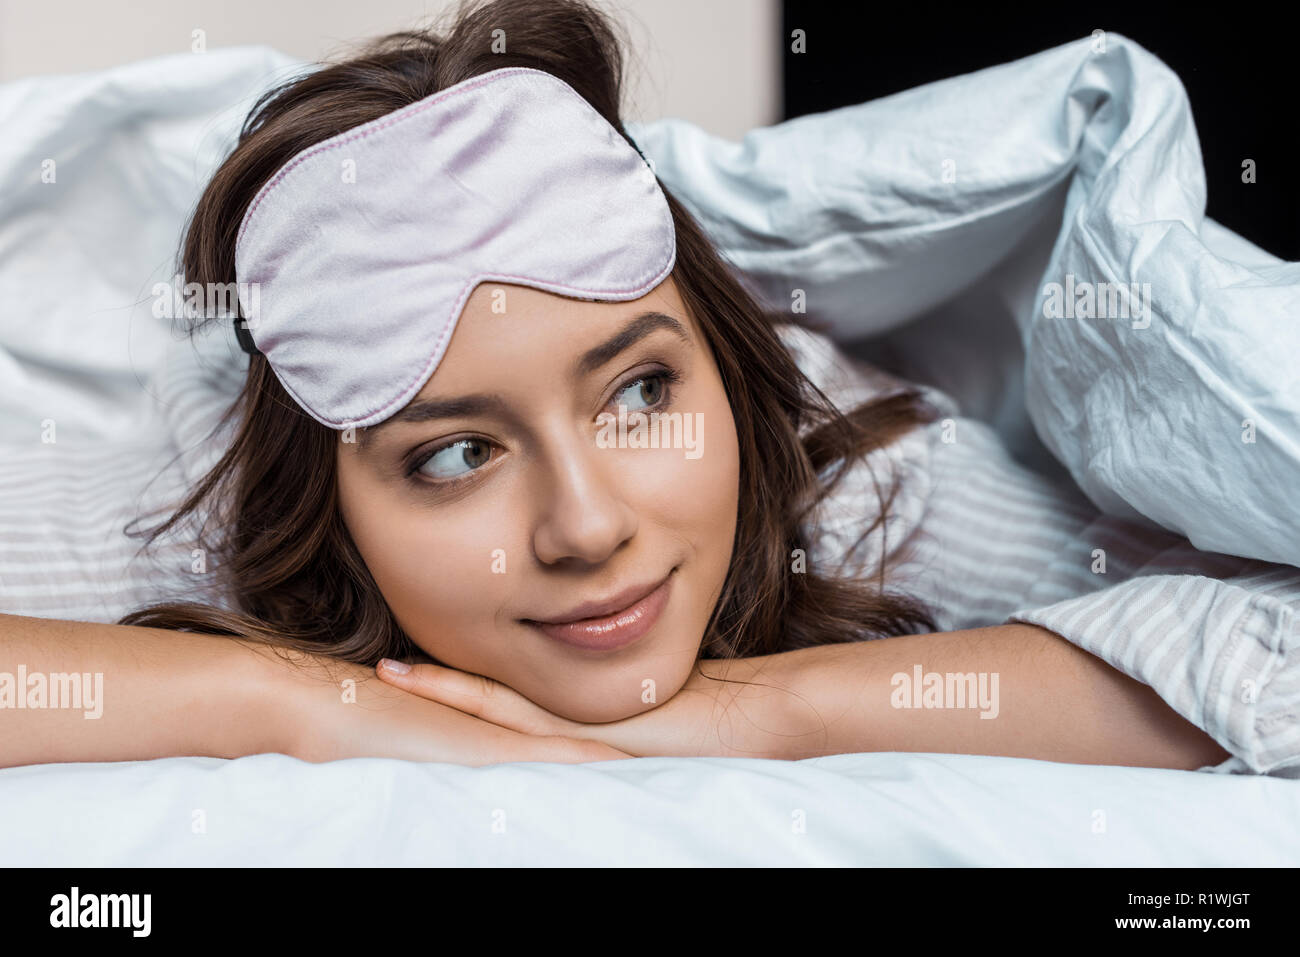 attractive girl in sleeping mask relaxing under blanket on bed Stock Photo